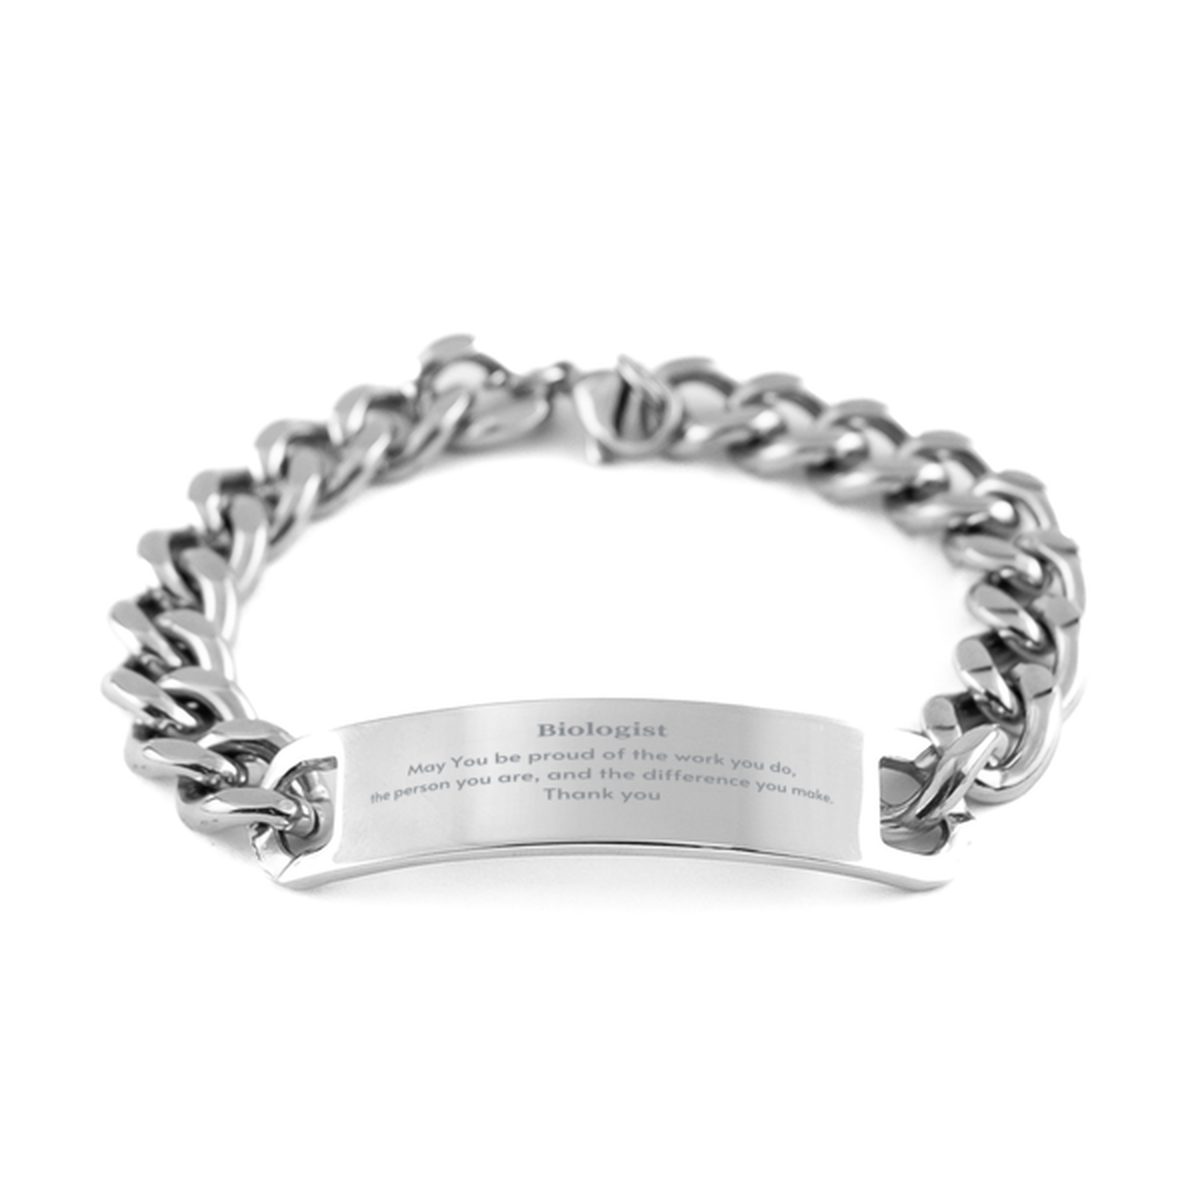 Heartwarming Cuban Chain Stainless Steel Bracelet Retirement Coworkers Gifts for Biologist, Biologist May You be proud of the work you do, the person you are Gifts for Boss Men Women Friends